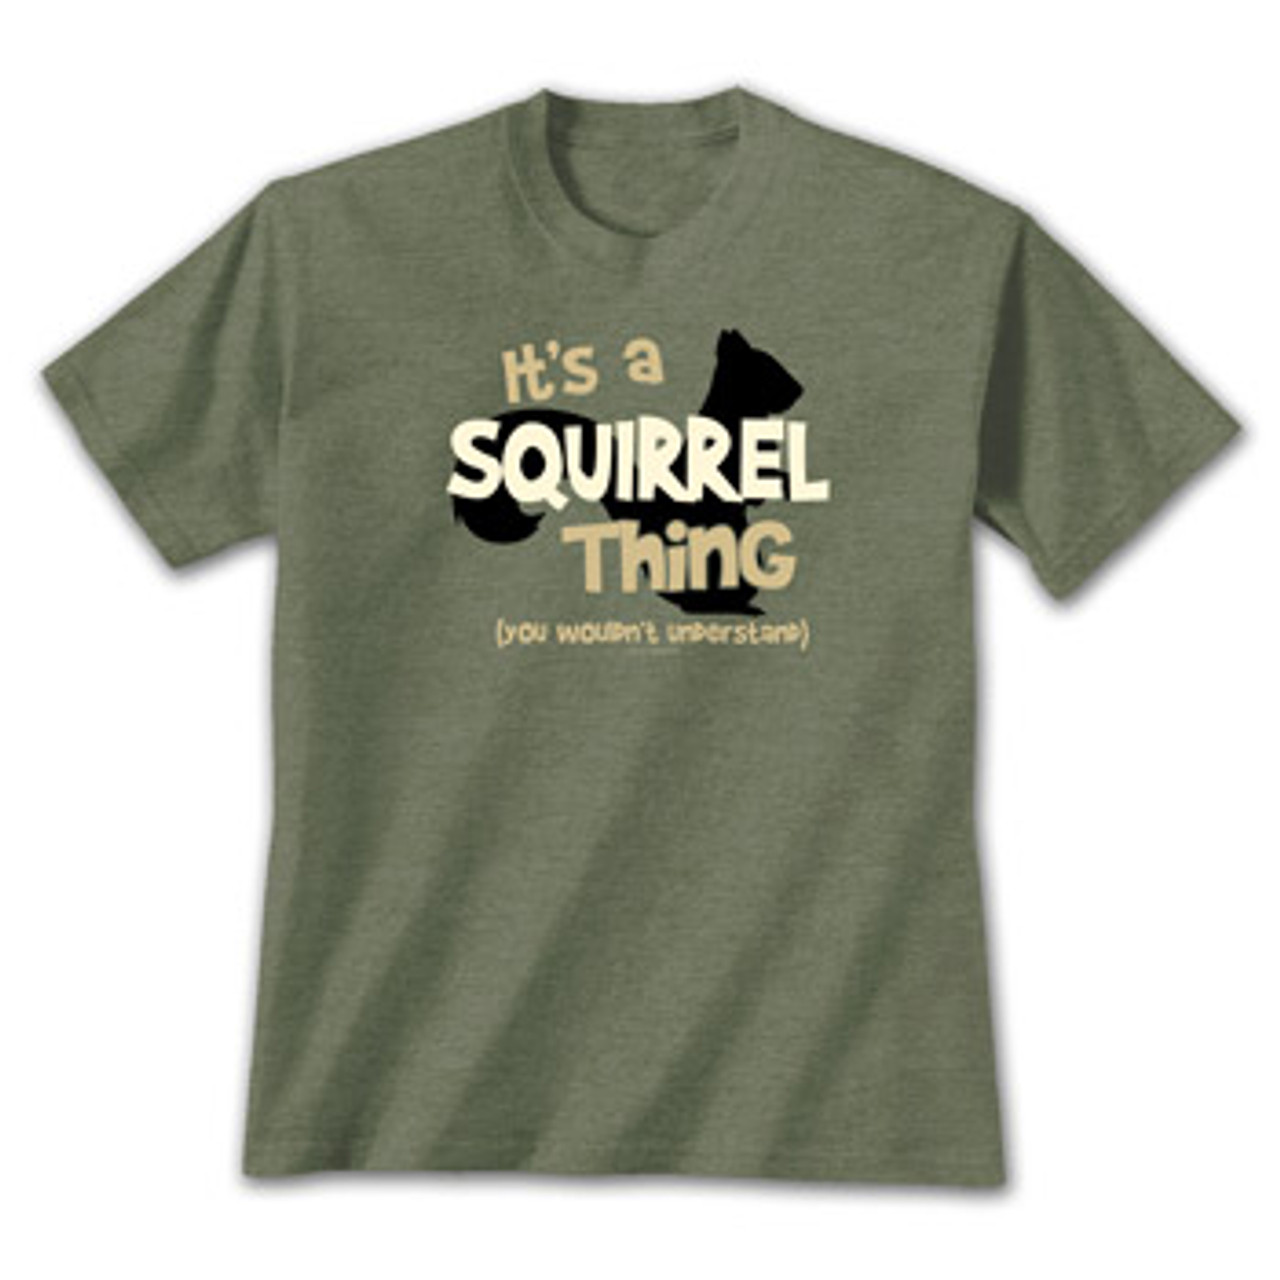 It's a Squirrel Thing T Shirt